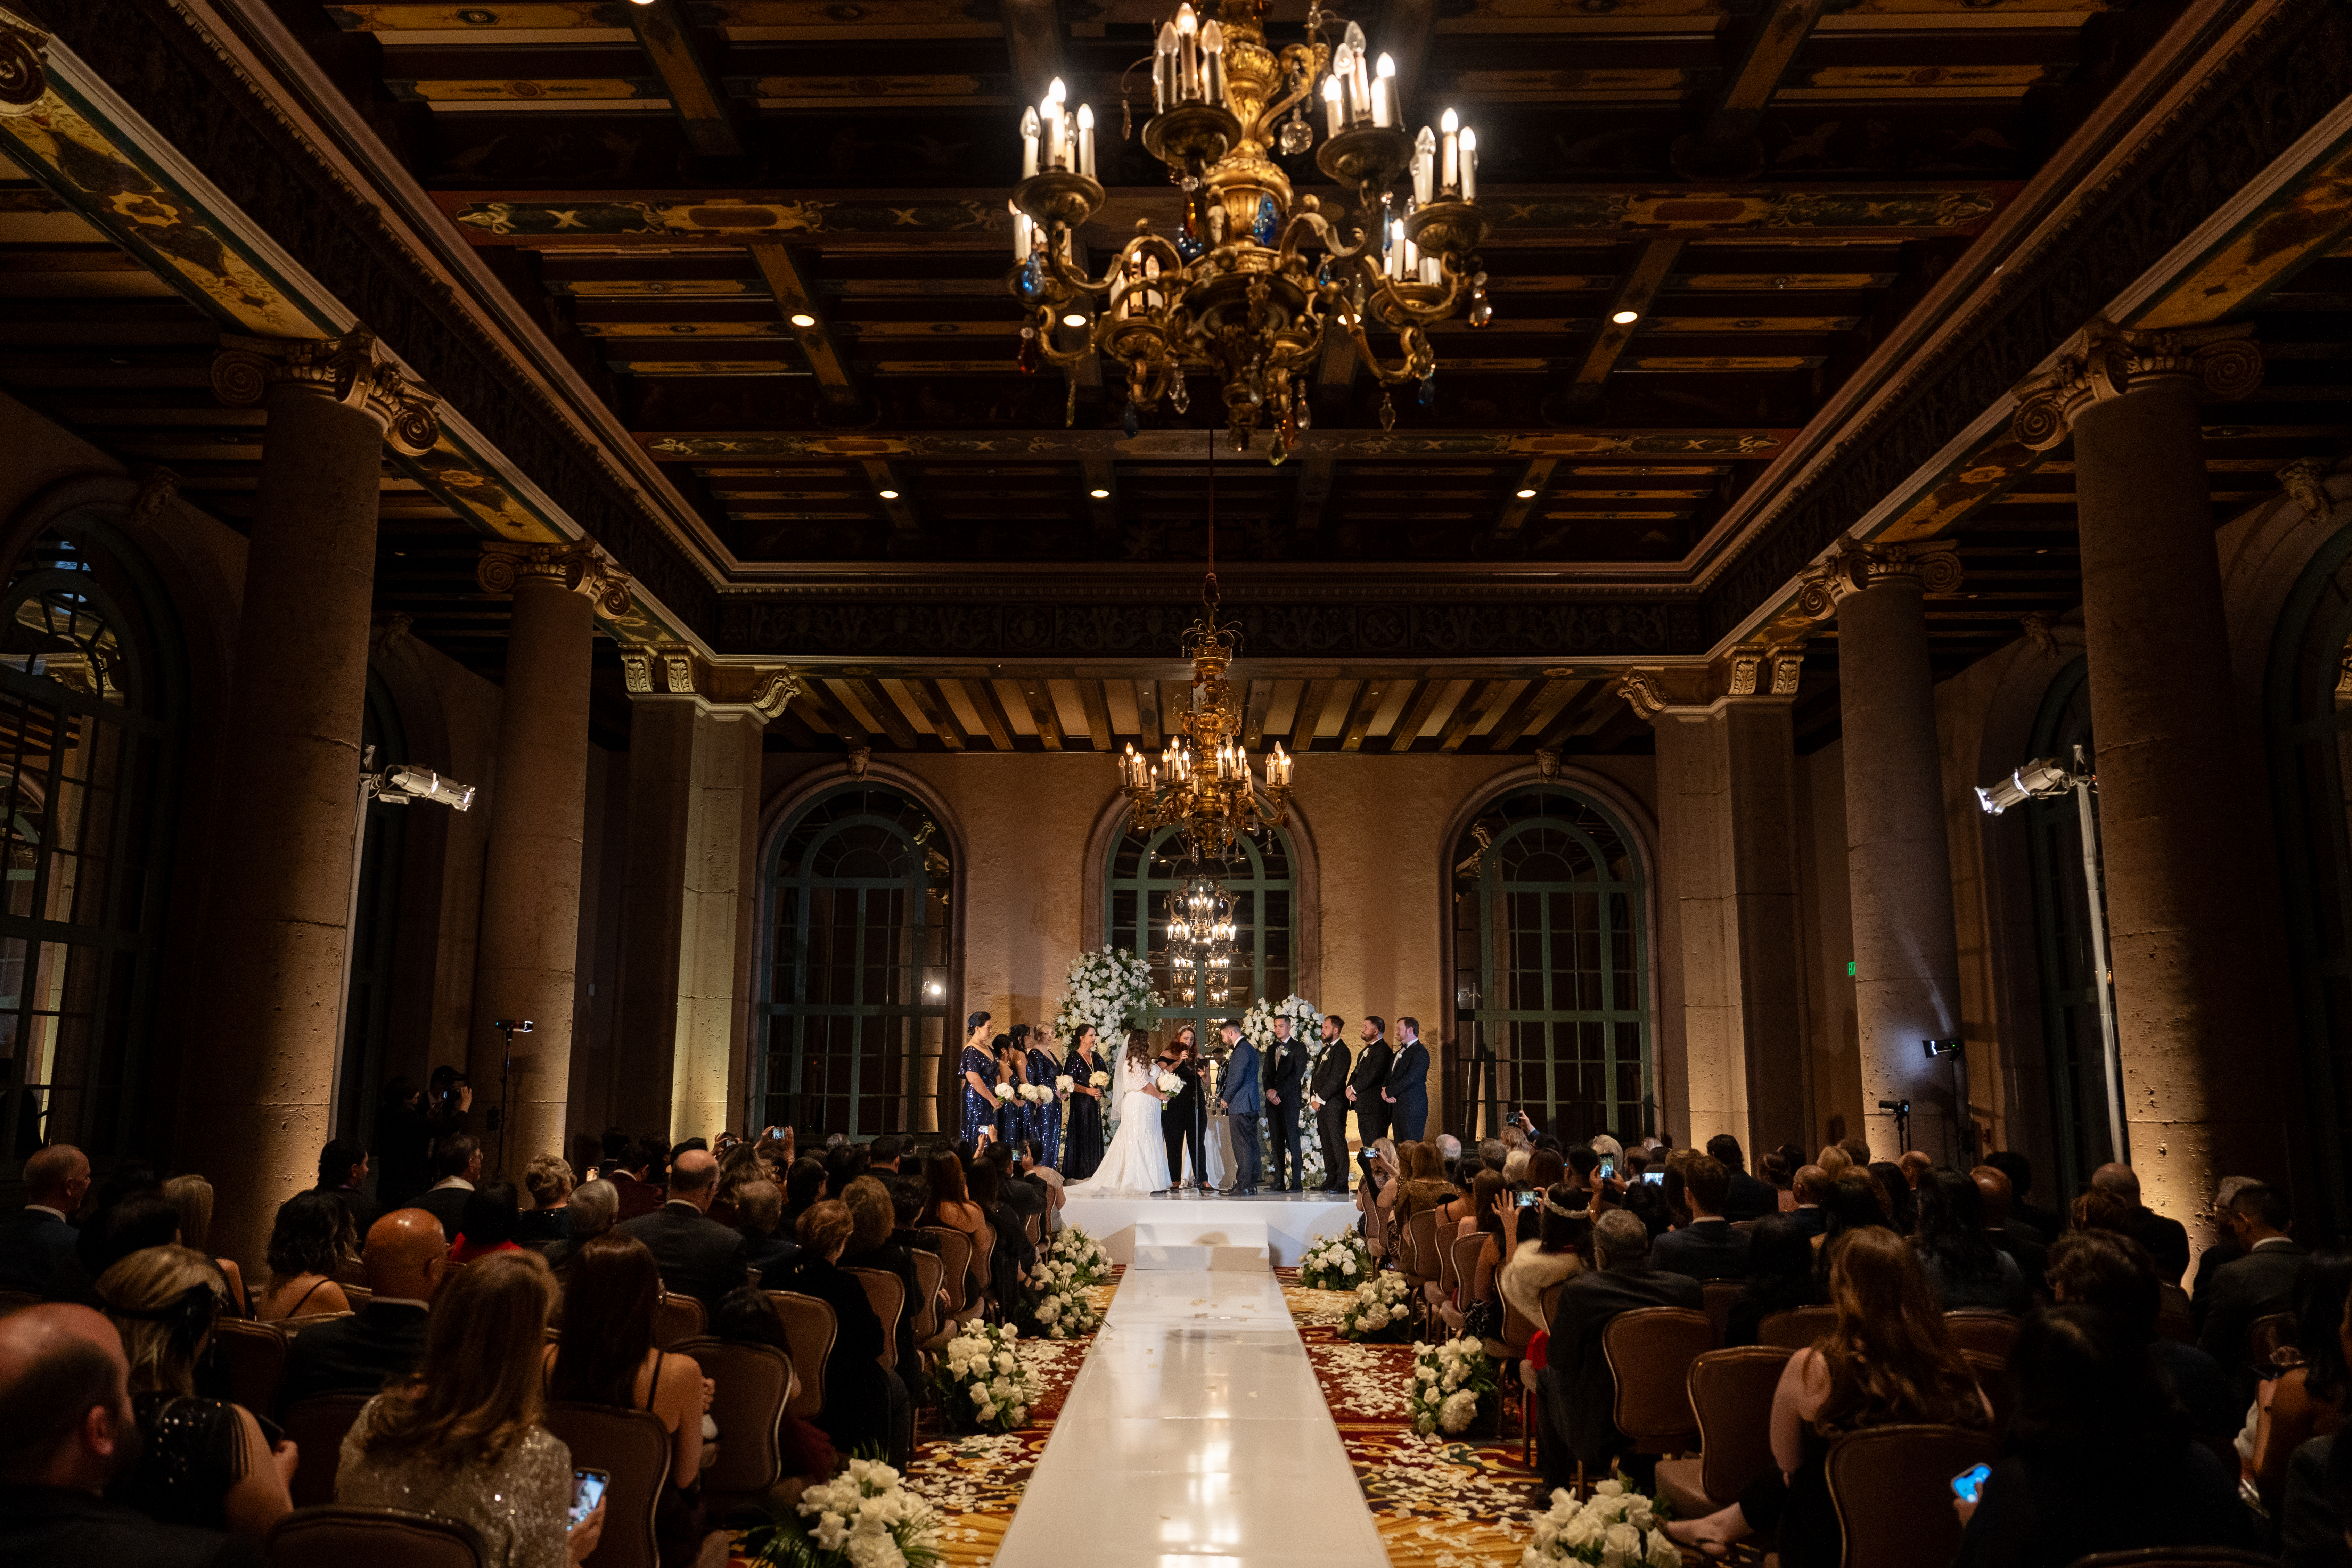 The Millennium Biltmore Los Angeles Wedding, Vintage Gatsby 1920's Theme Wedding. Old Hollywood Wave Hair Style, Classic Red Lip Makeup Look by Angela Tam Glam Team | Beloved Glamorous LLC.